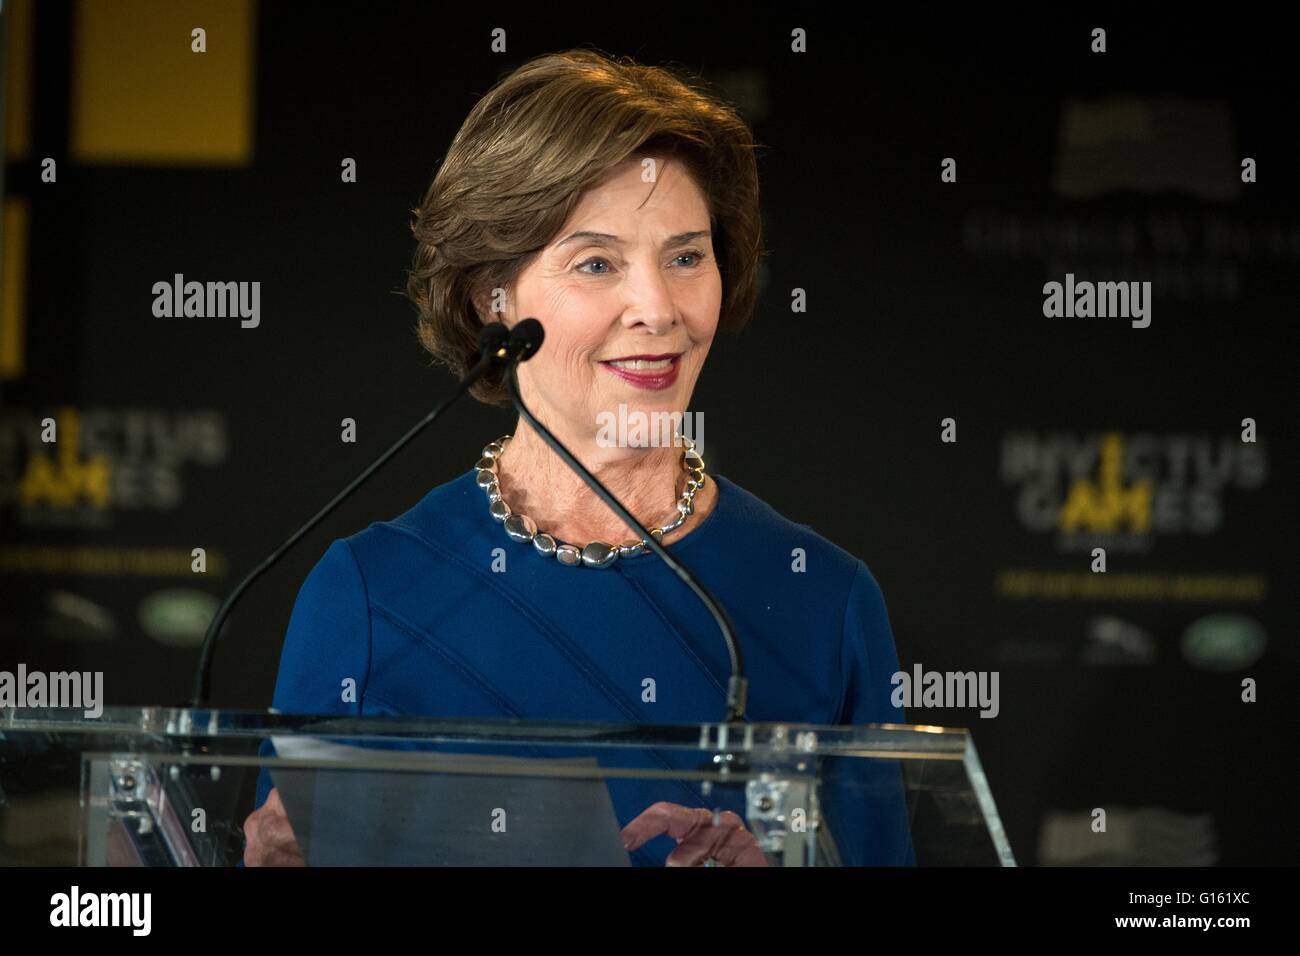 Former First Lady Laura Bush introduces Prince Harry and her husband former President George W Bush during the  2016 Invictus Games Symposium on Invisible Wounds May 8, 2016 in Orlando, Florida. The symposium hosted by Prince Harry and former President George W. Bush sought to remove the stigma suffered by victims of post traumatic stress and other injuries that are not regularly visible. Stock Photo